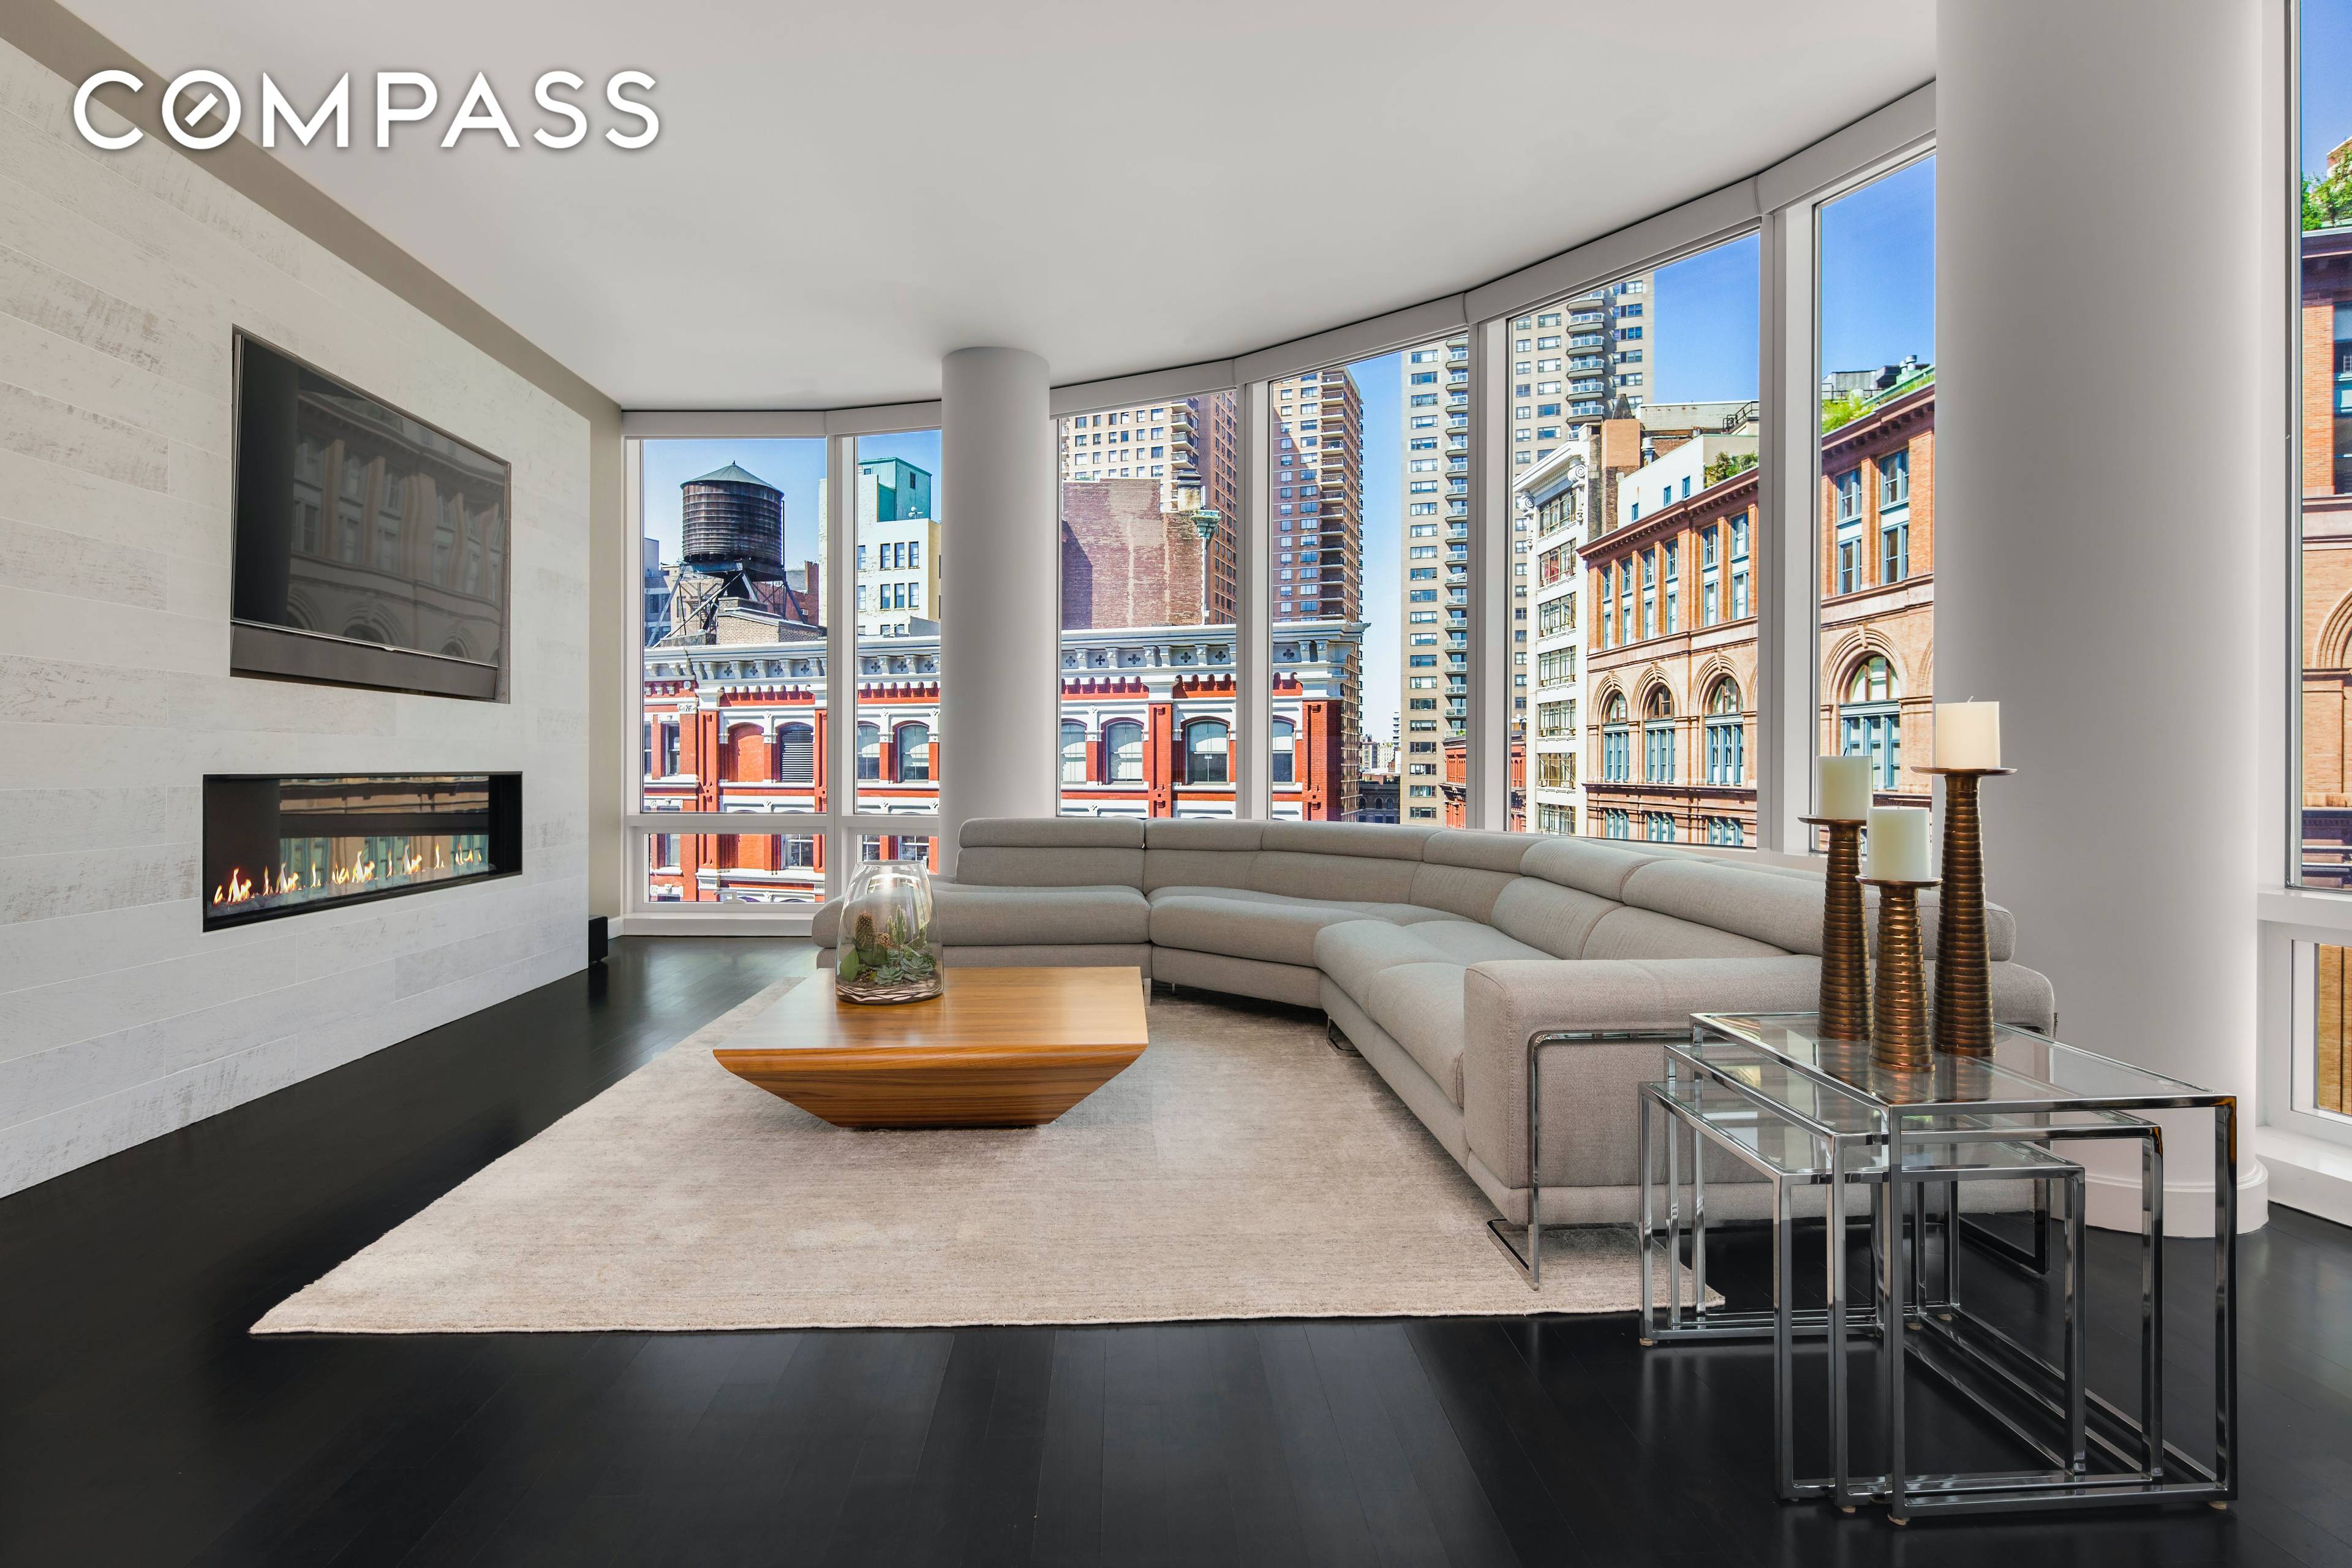 This enormous two bedroom, two bathroom home offers magnificent city views, luxurious finishes and unrivaled service and amenities in a distinctive NoHo high rise.